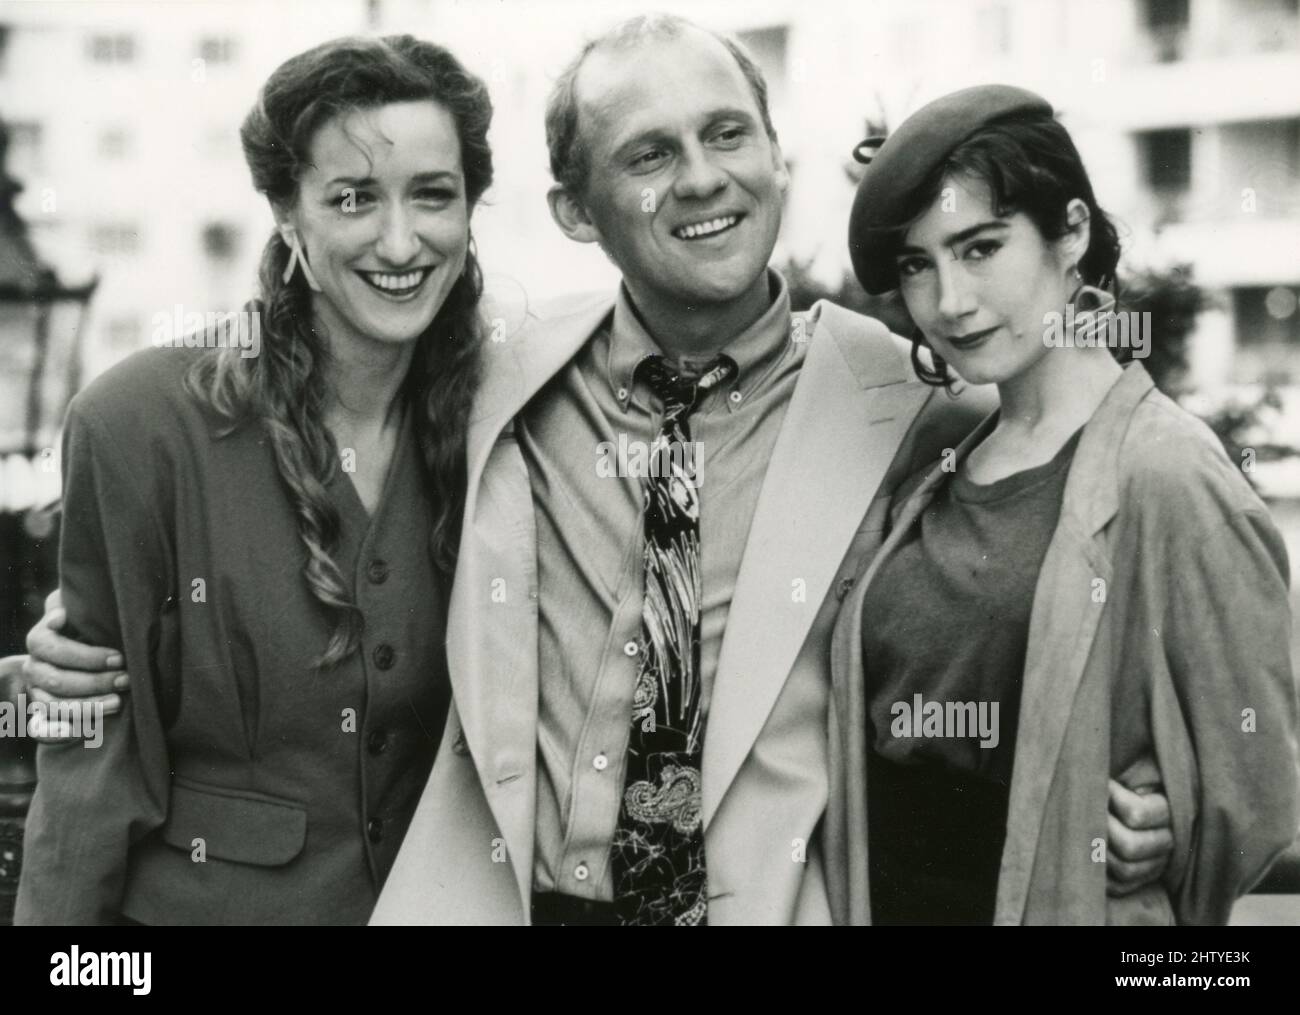 English actor Peter Firth and actresses Haydn Gwynne (left) and Lyndsey